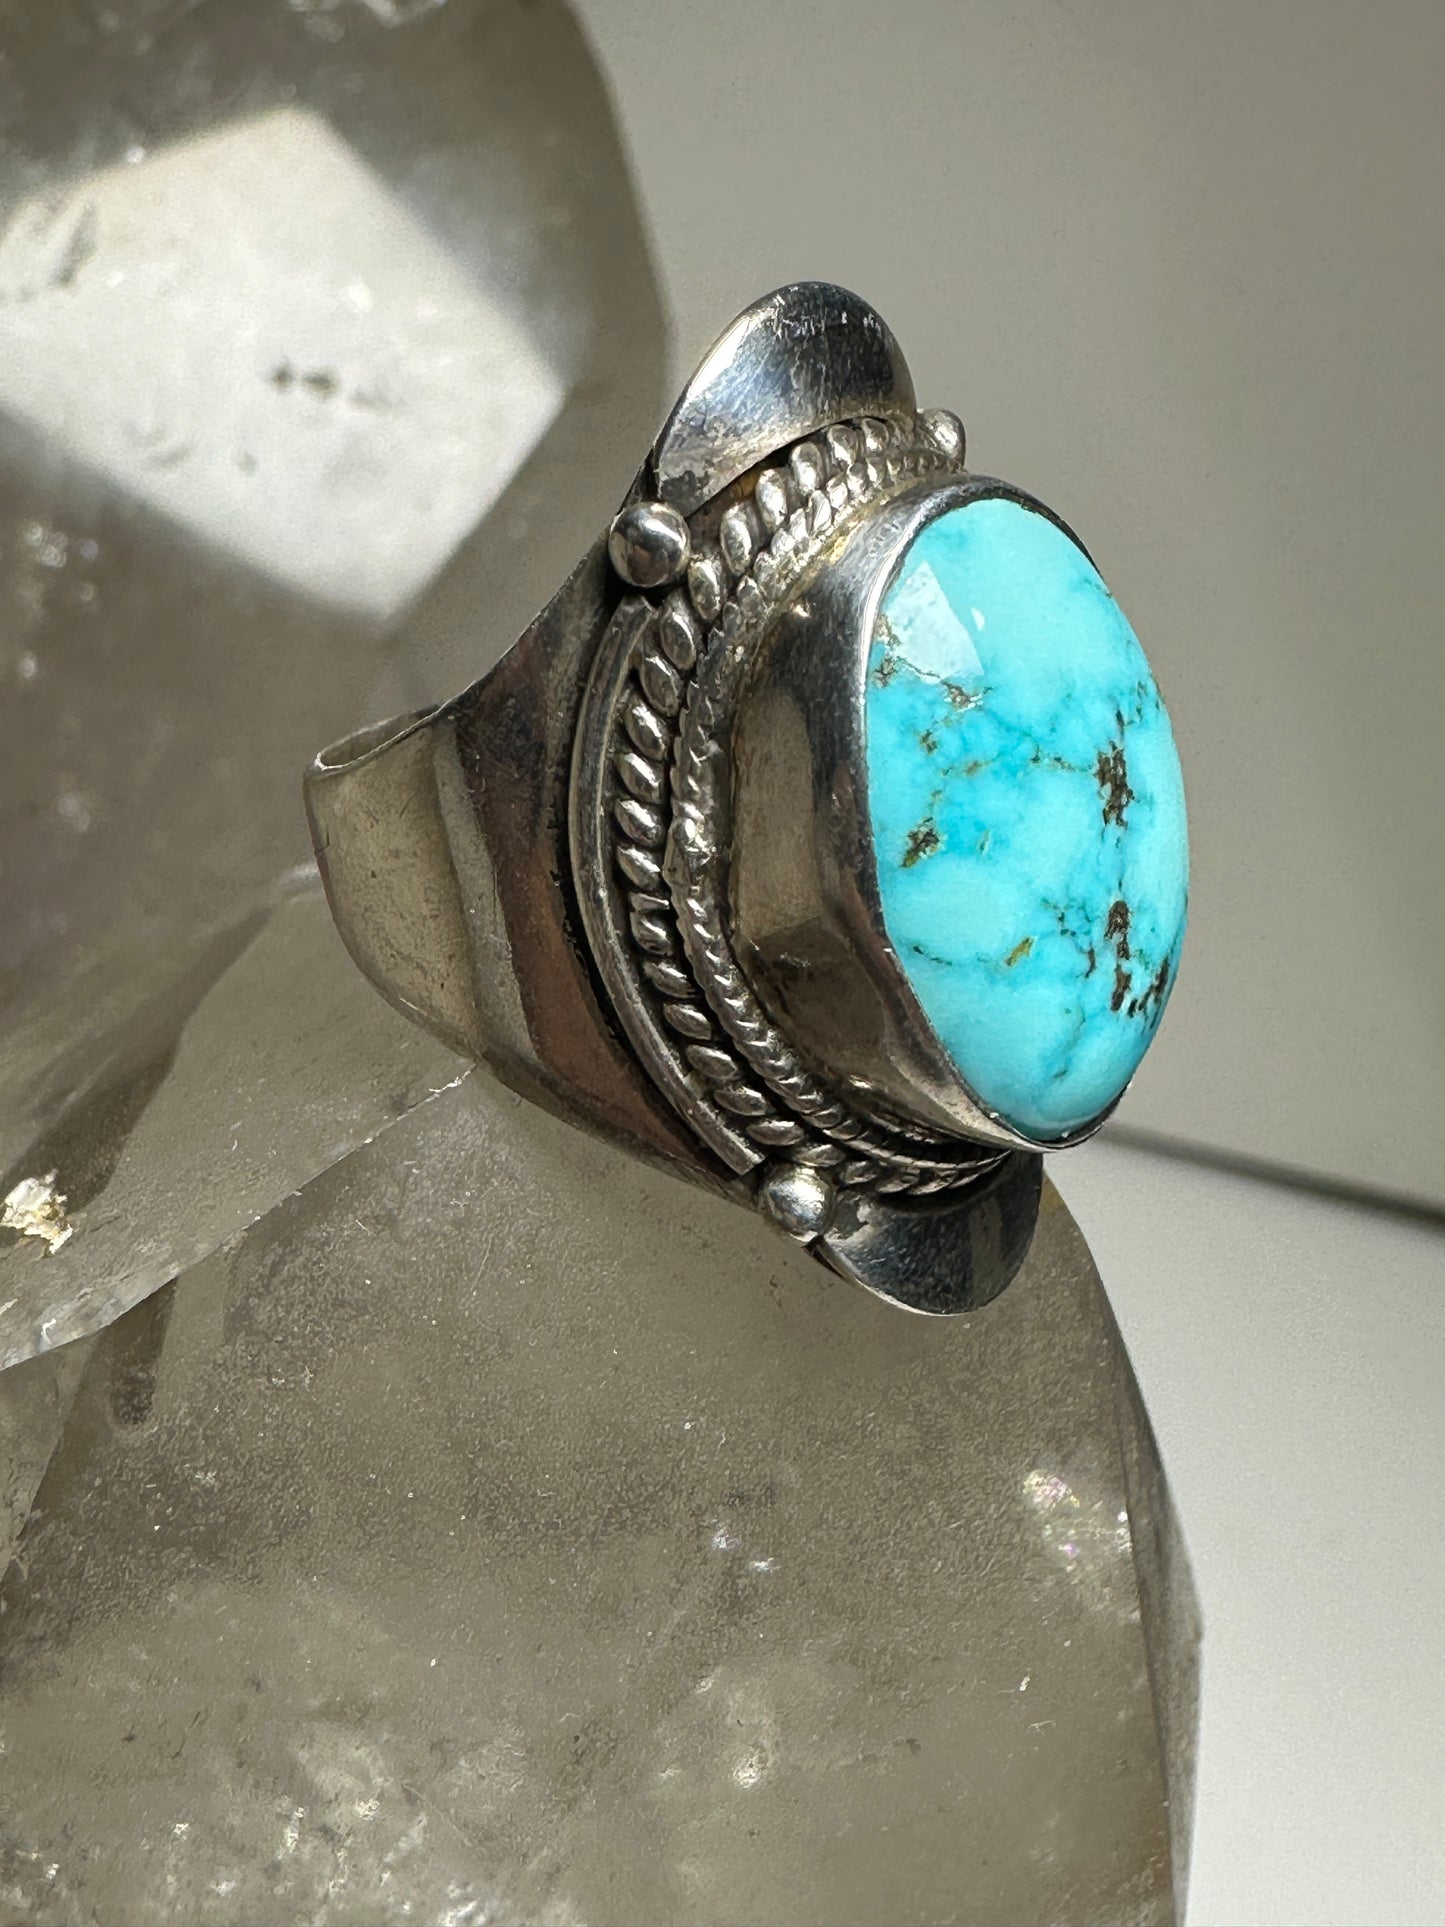 Turquoise ring cigar band boho size 6 sterling silver women